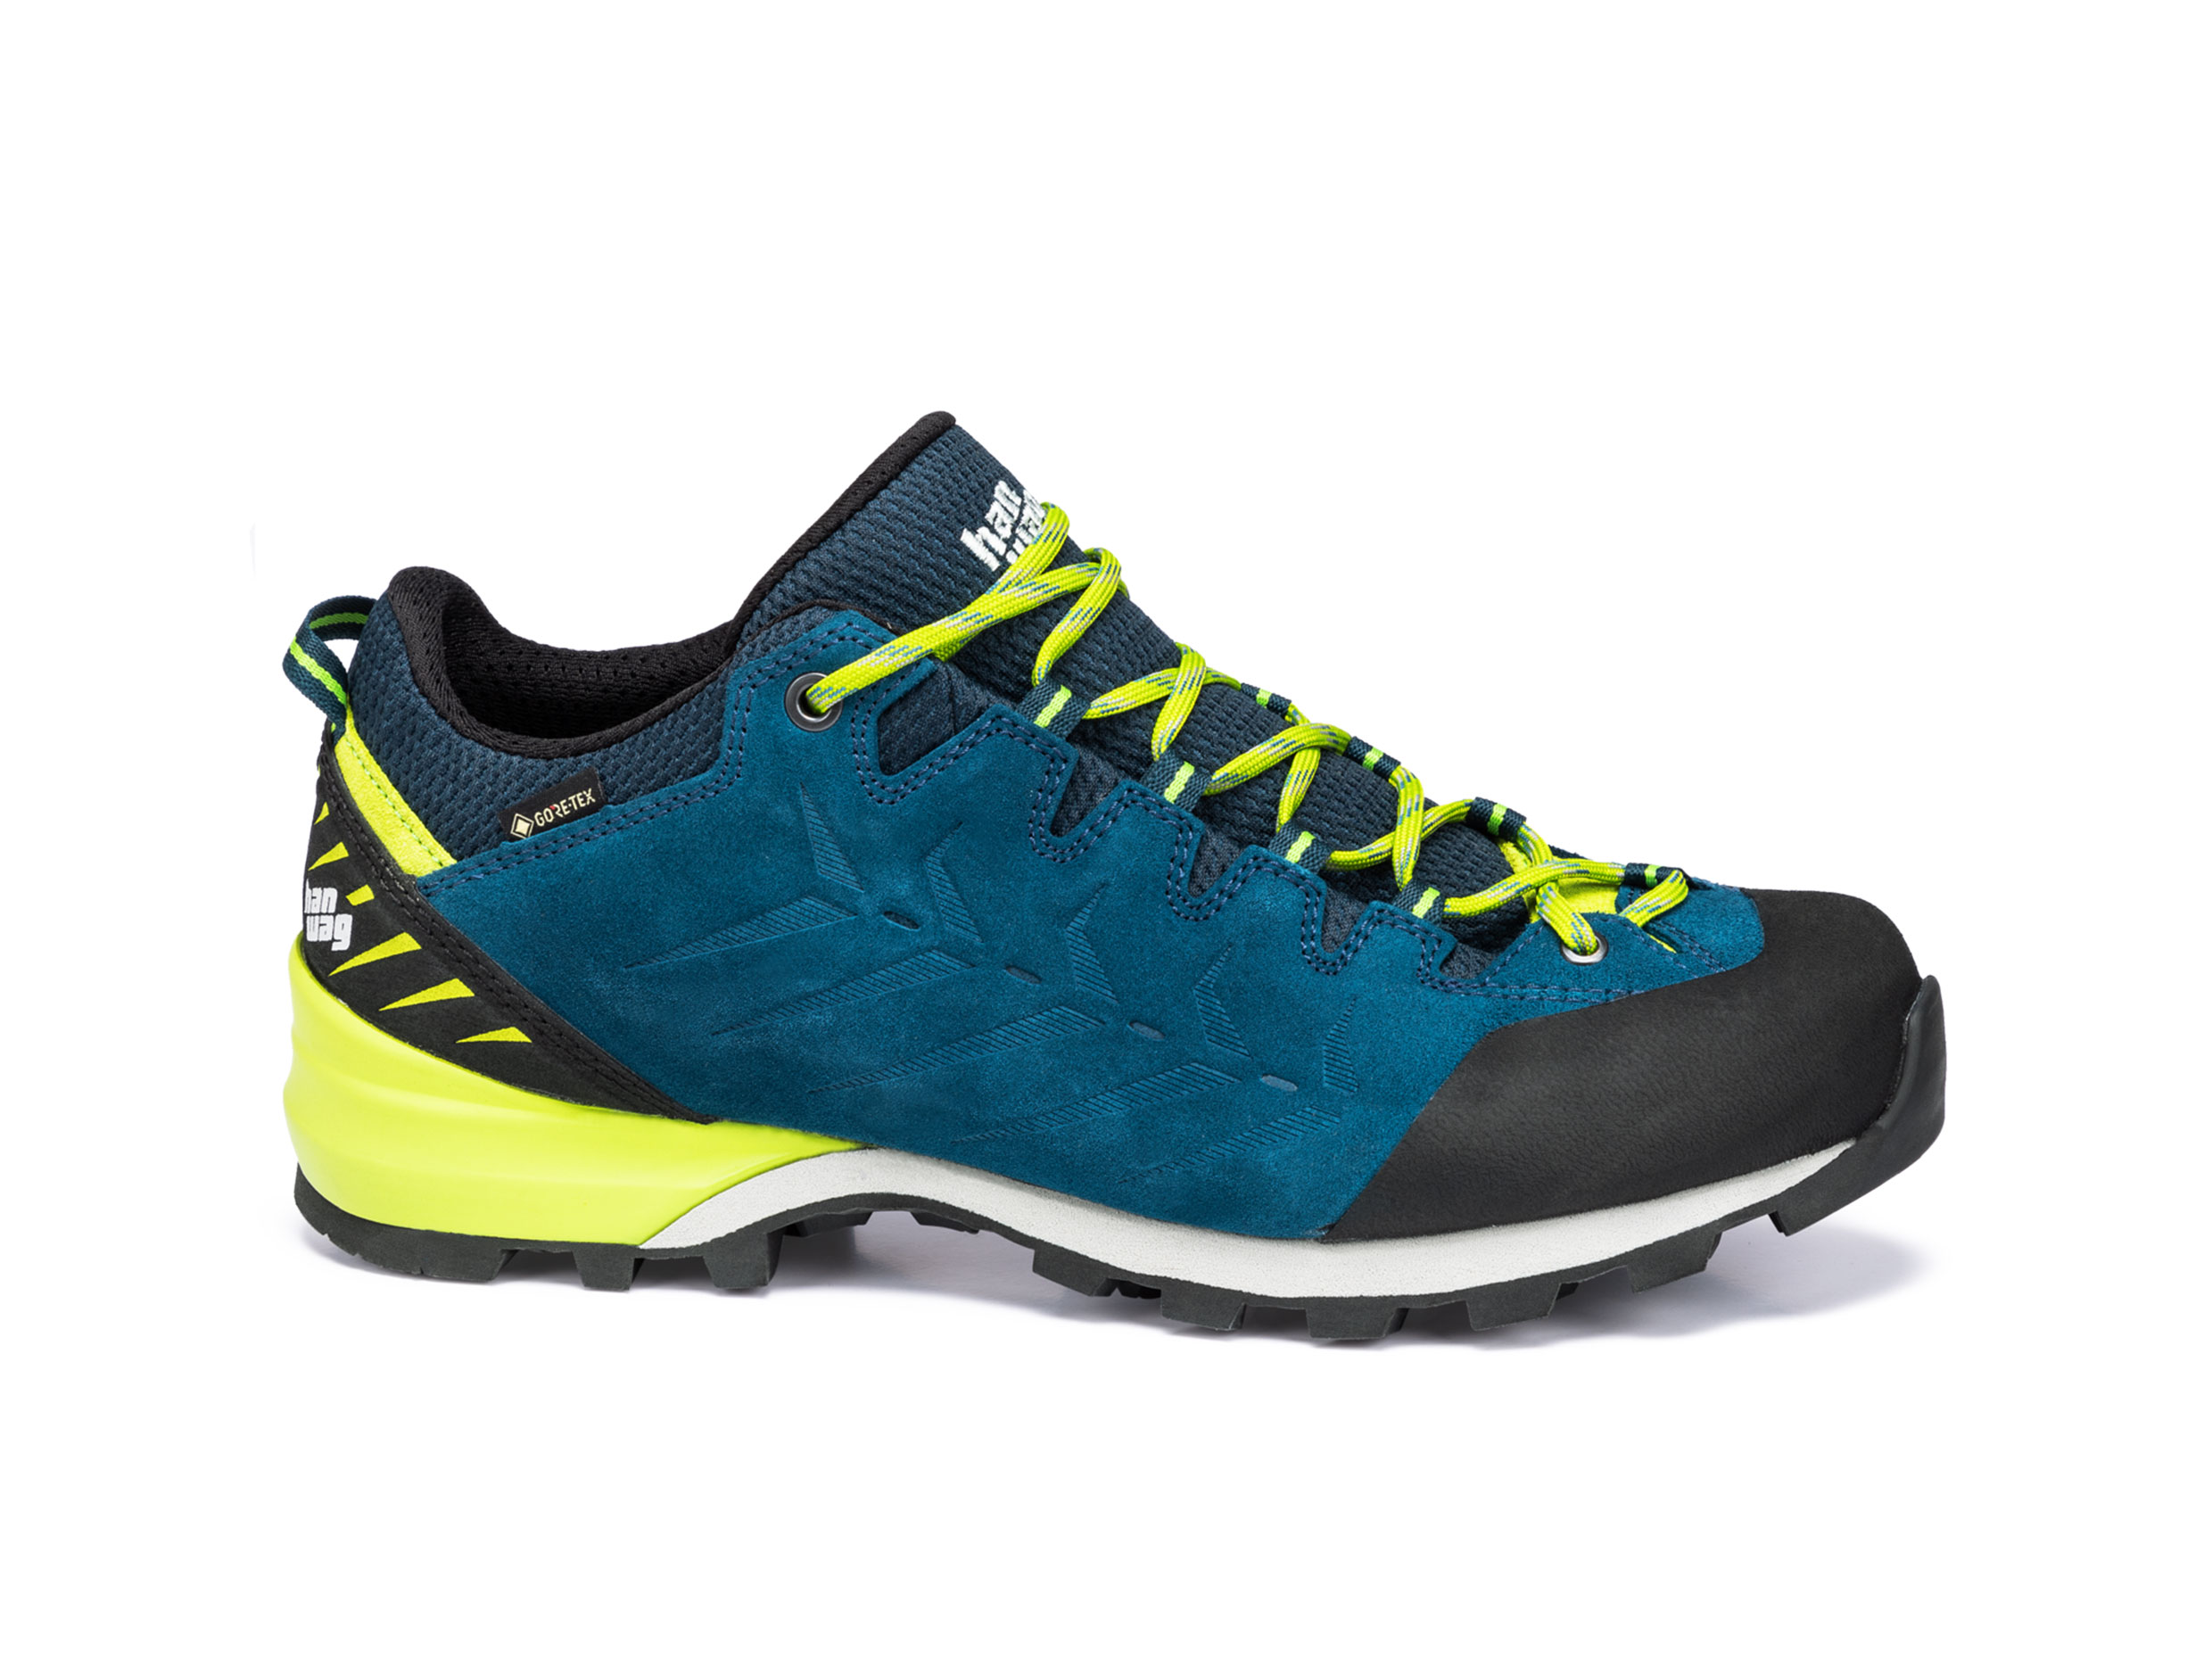 Hanwag Makra Pro Low GTX in different colours